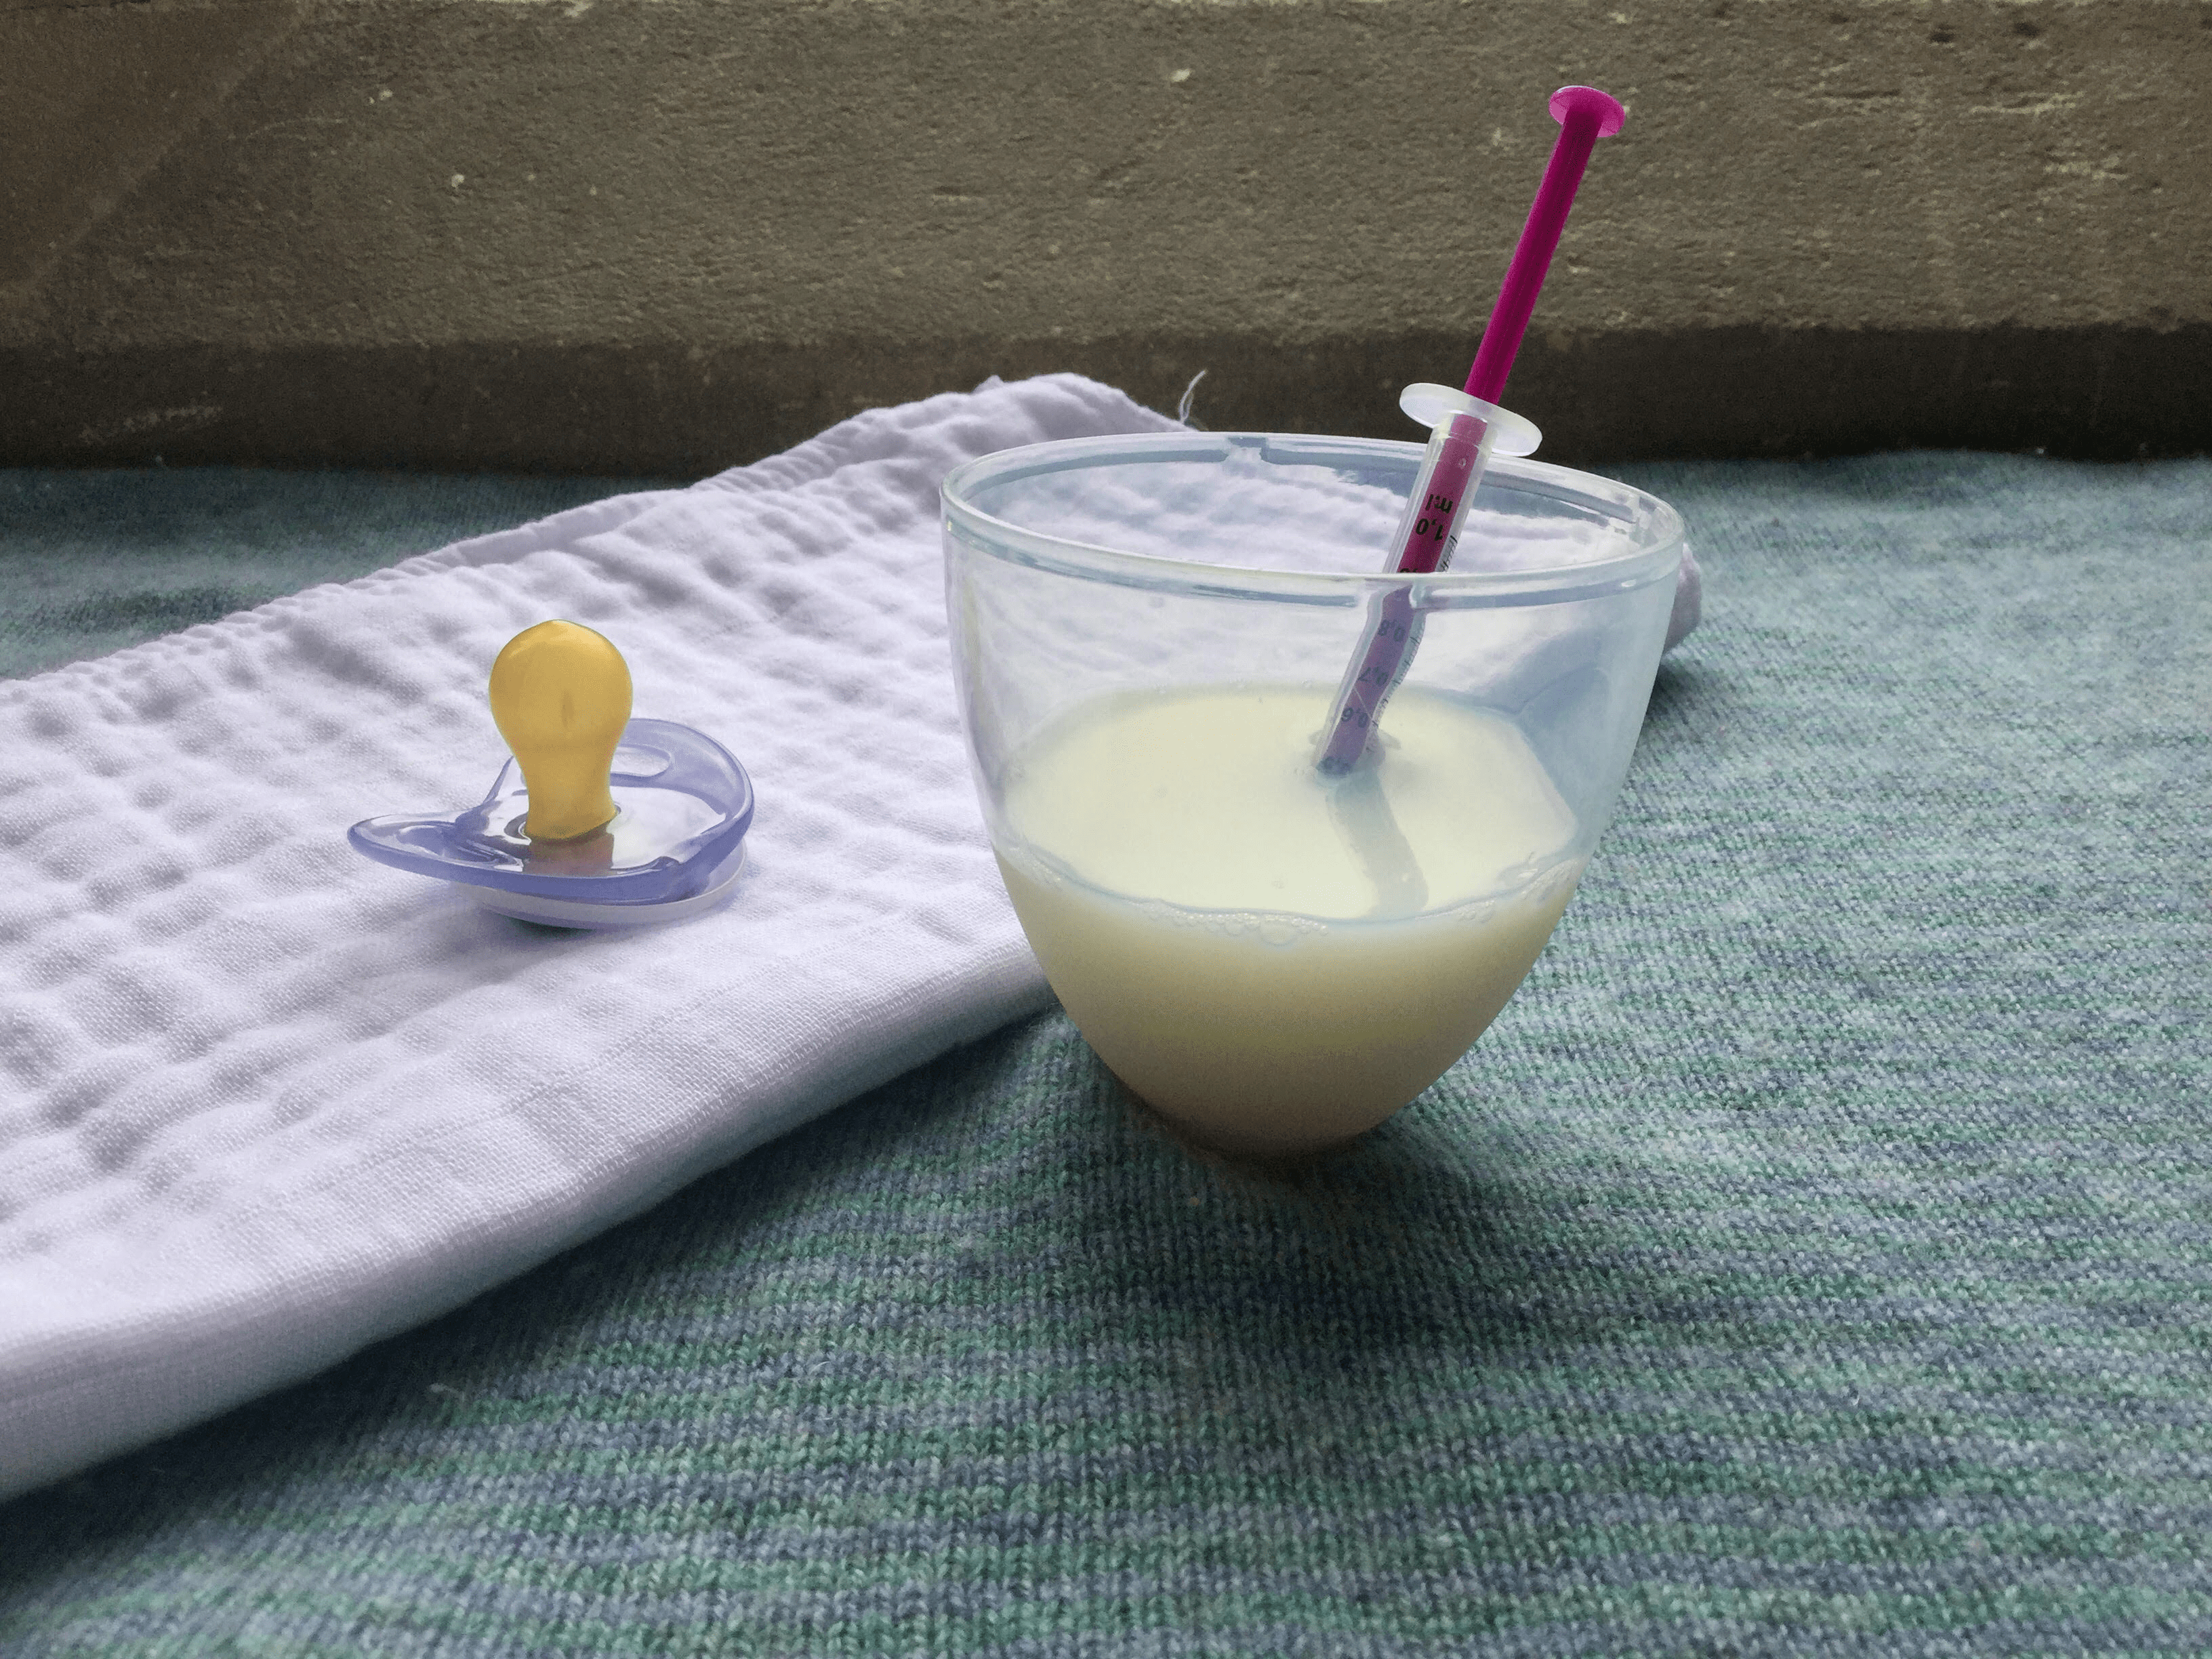 Muslin square, milk, syringe and pacifier